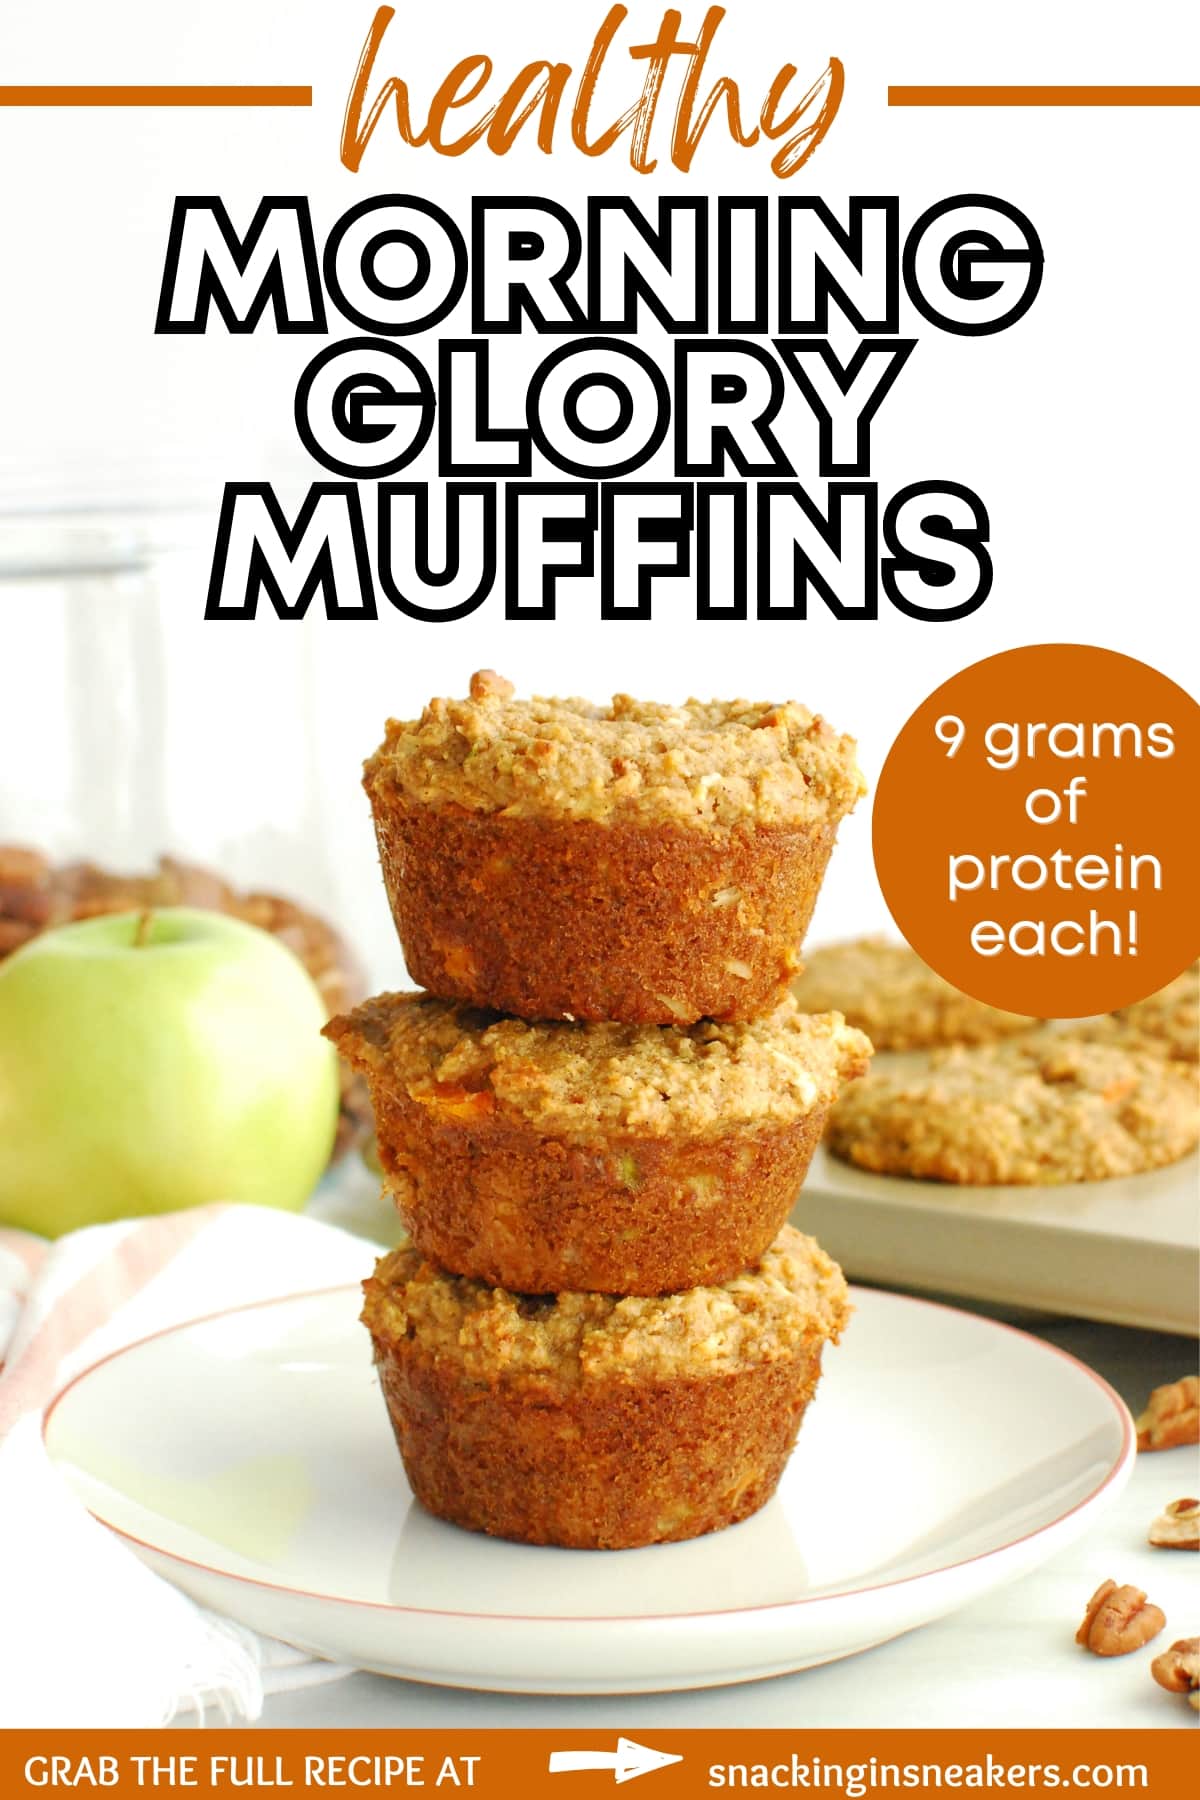 Three healthy morning glory muffins stacked on top of each other, with a text overlay with the name of the recipe.